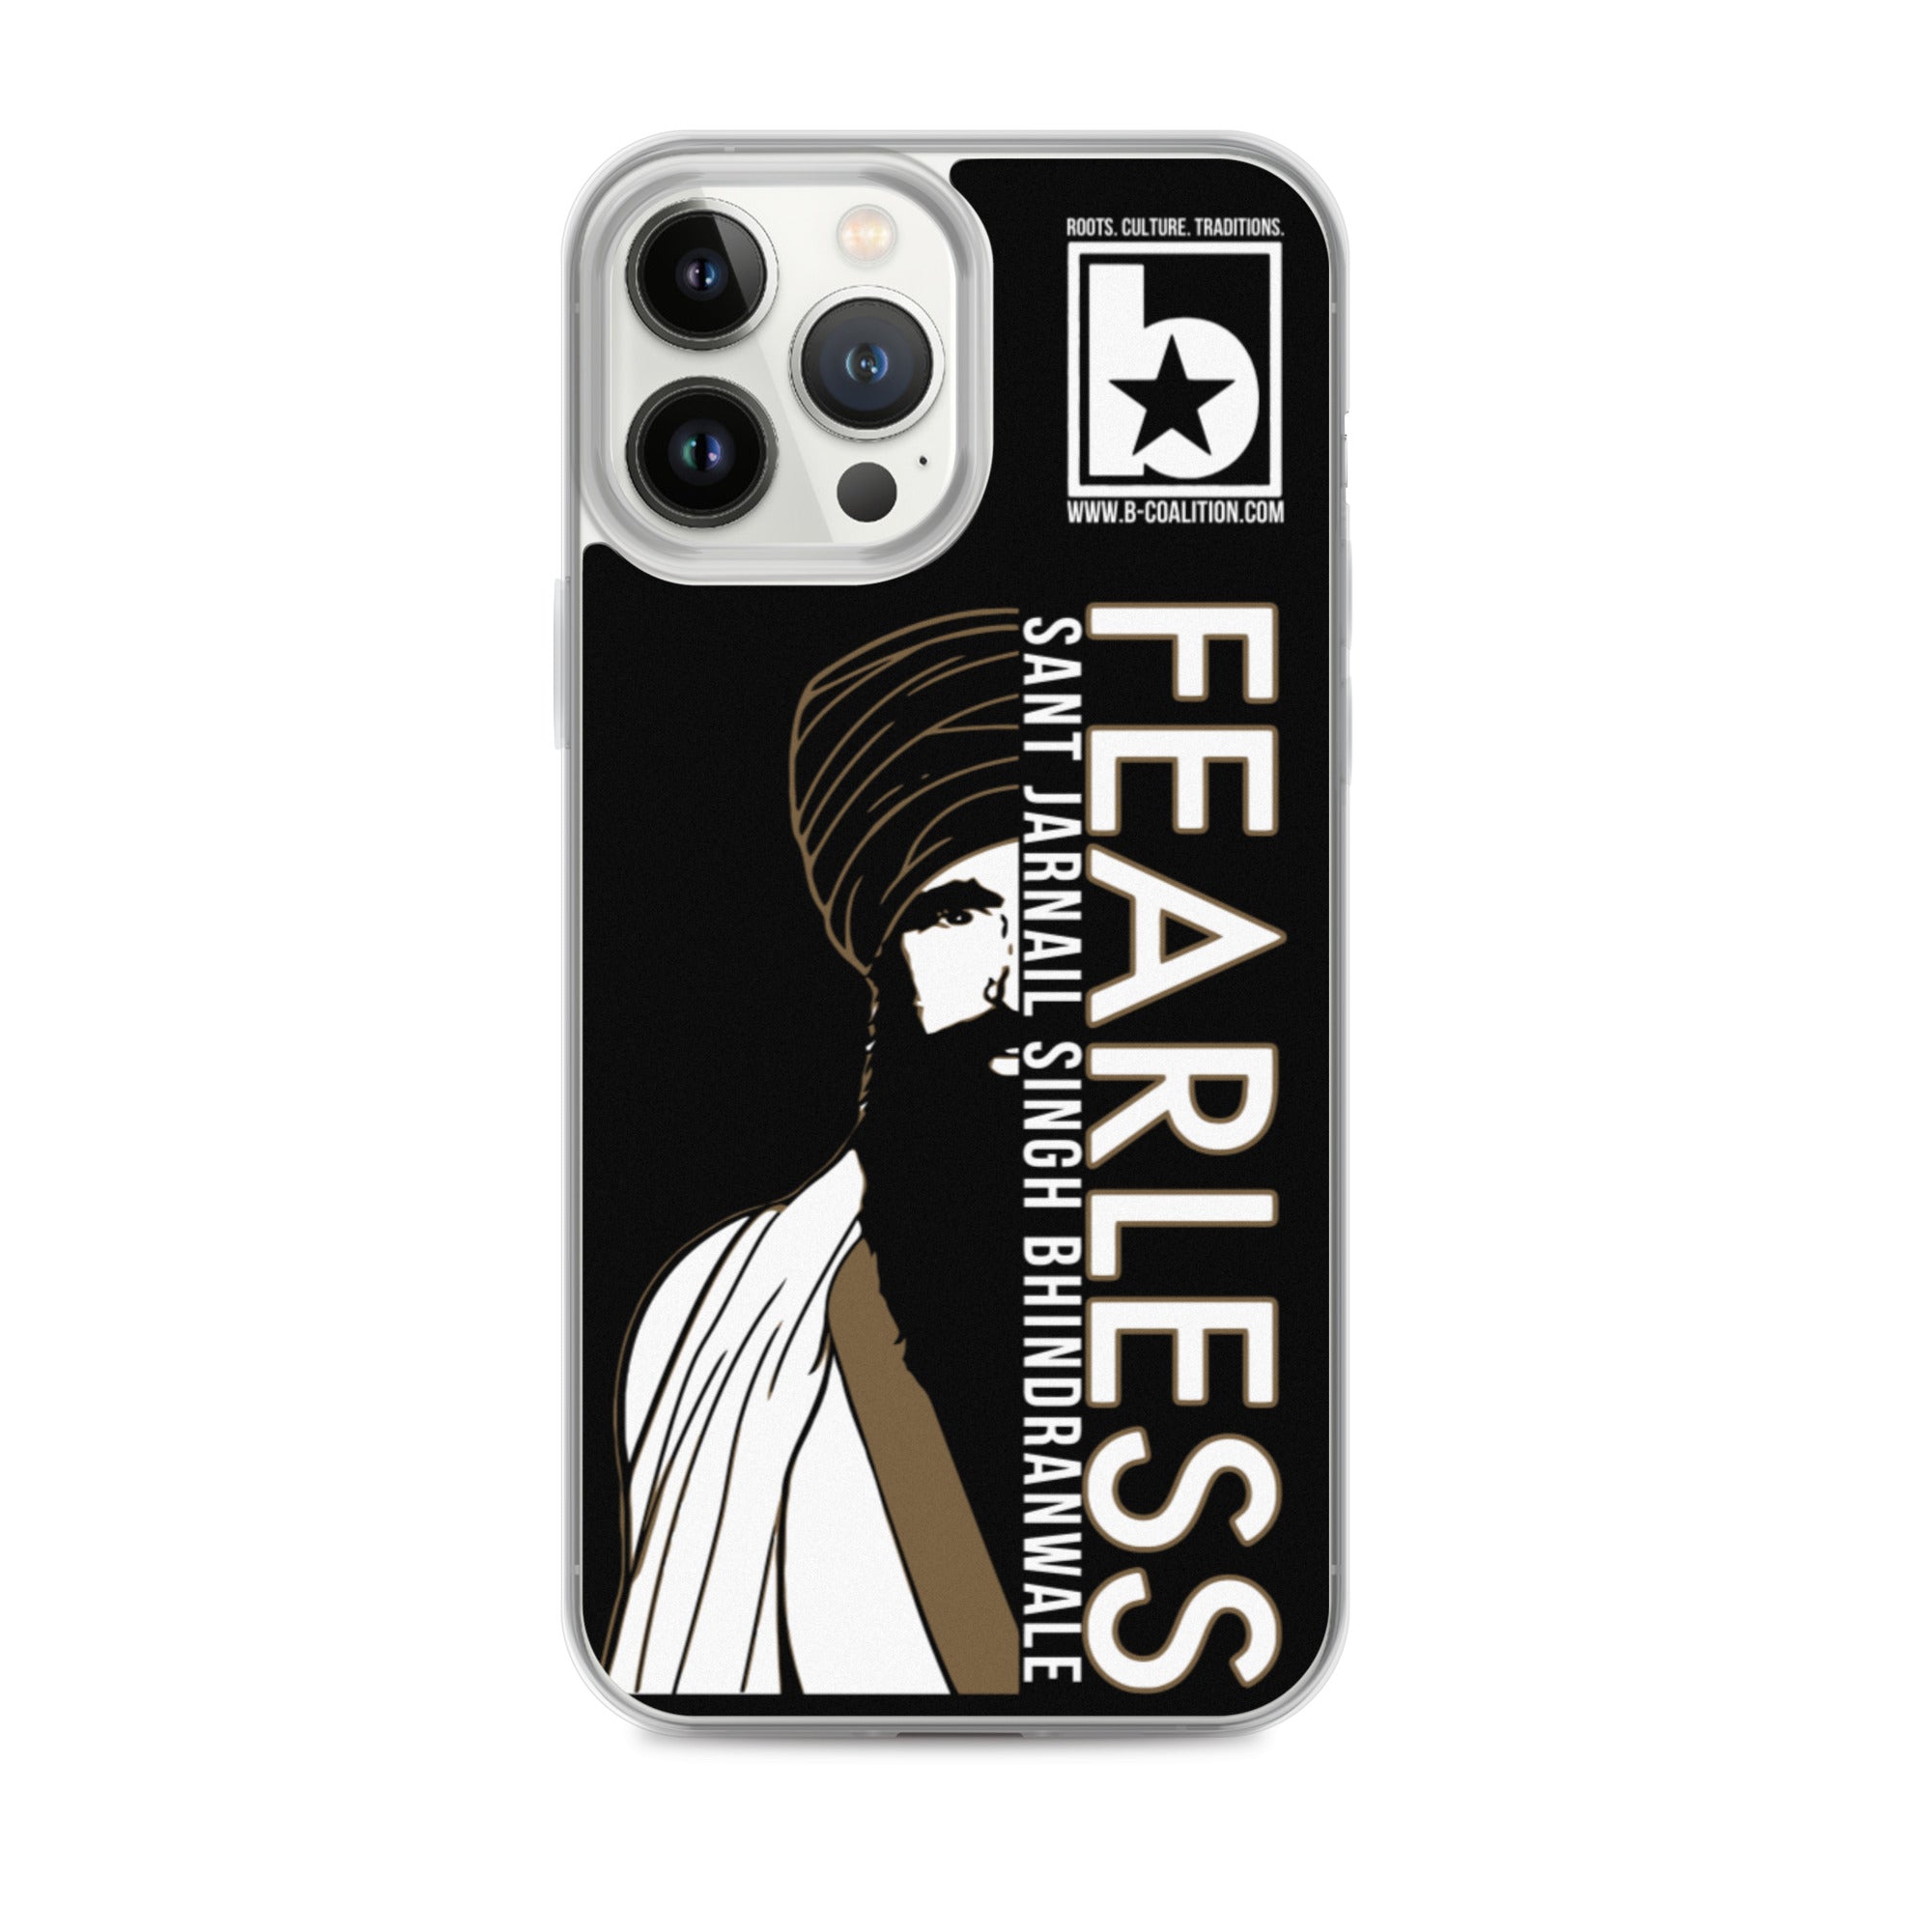 Fearless - Jarnail Singh Bhindranwale iPhone Case - B-Coalition Clothing Company